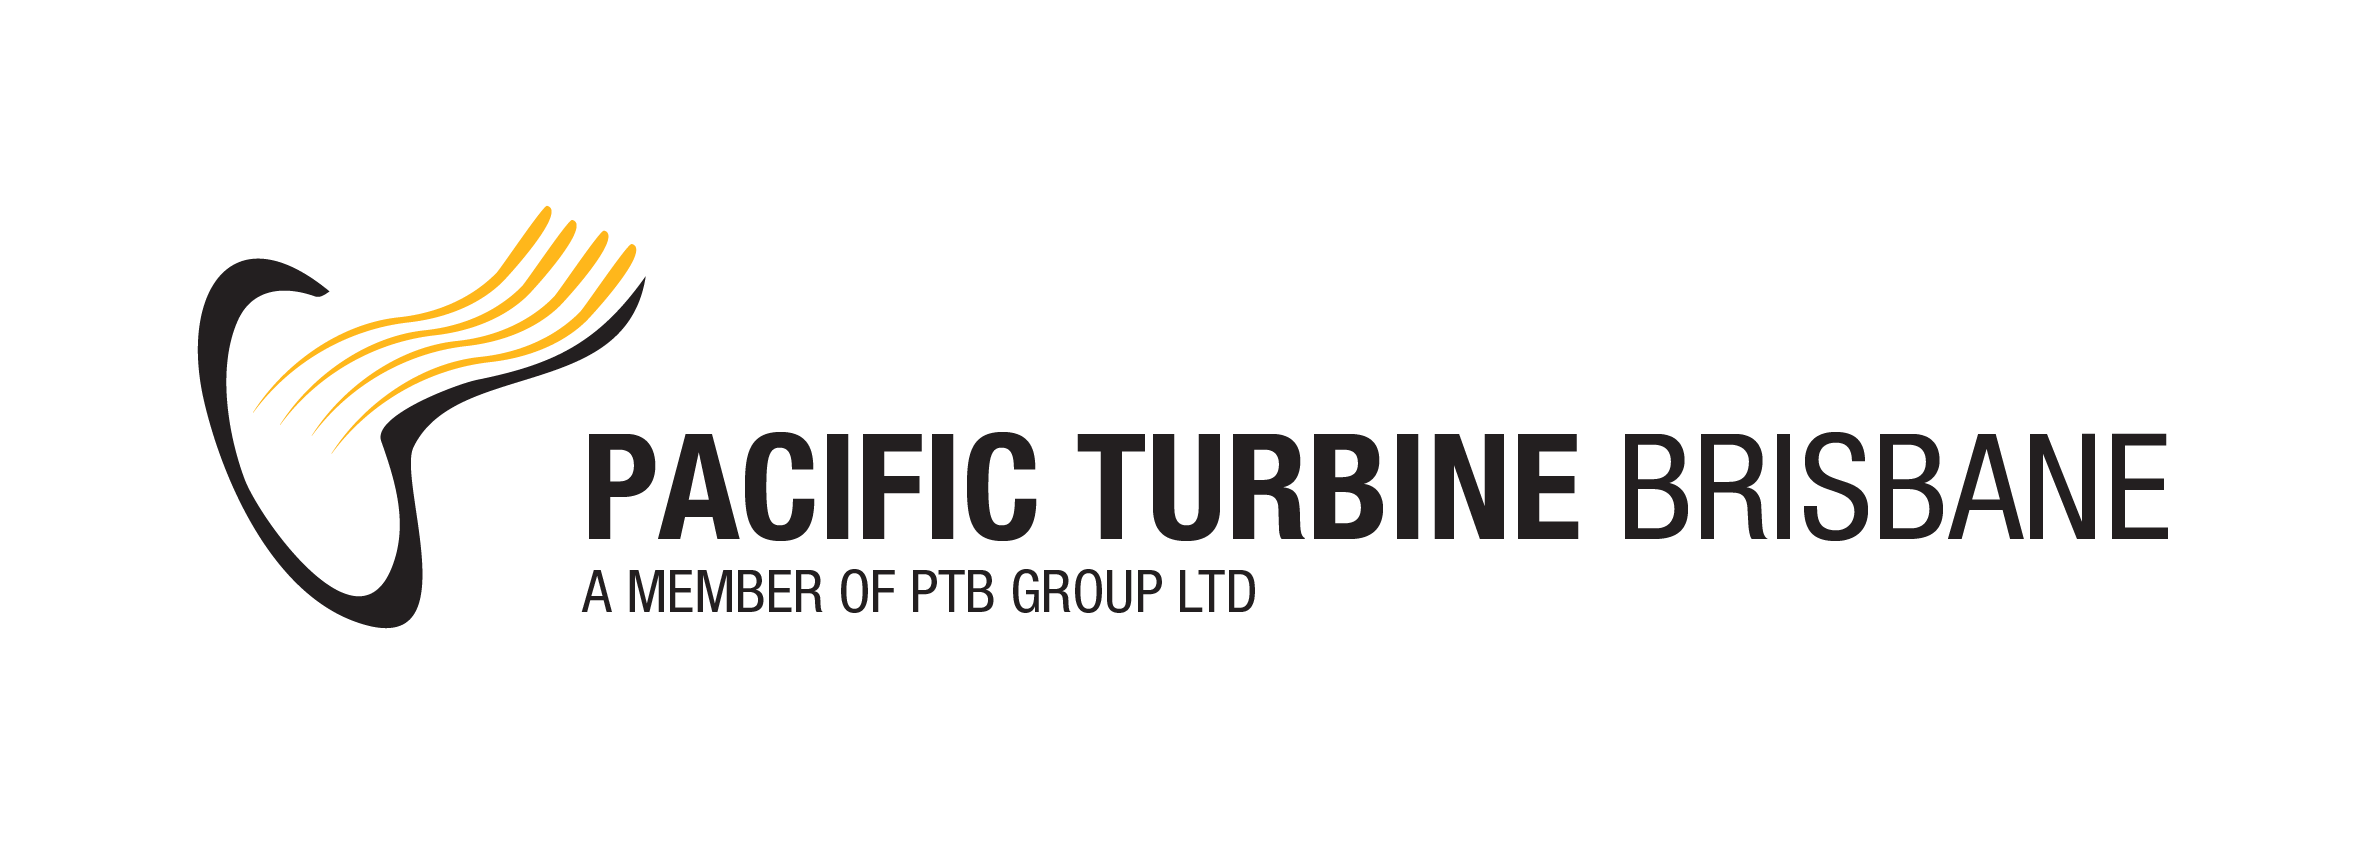 PTB Group Limited Logo